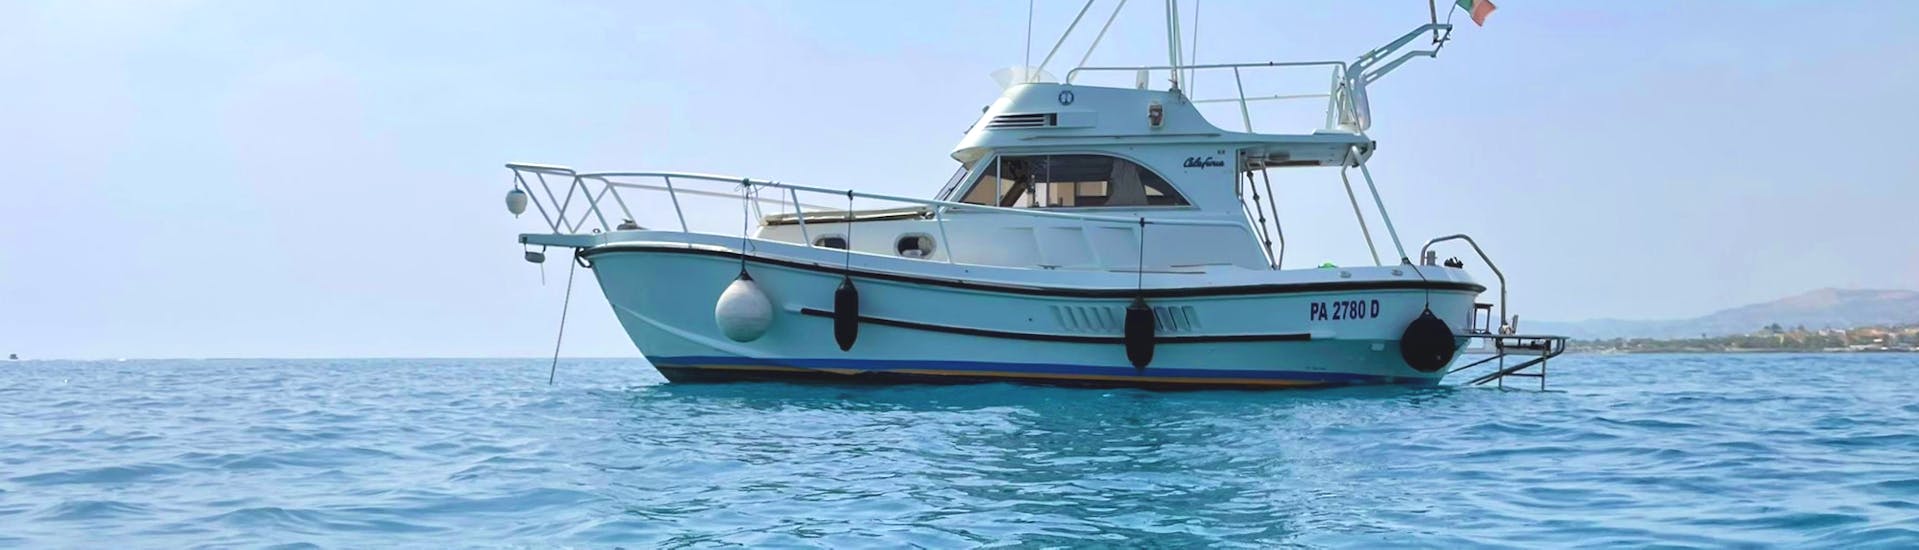 Picture of the boat used by Sea Adventure of Sarah for the Private Boat Trip from Agrigento to the Stair of the Turks.